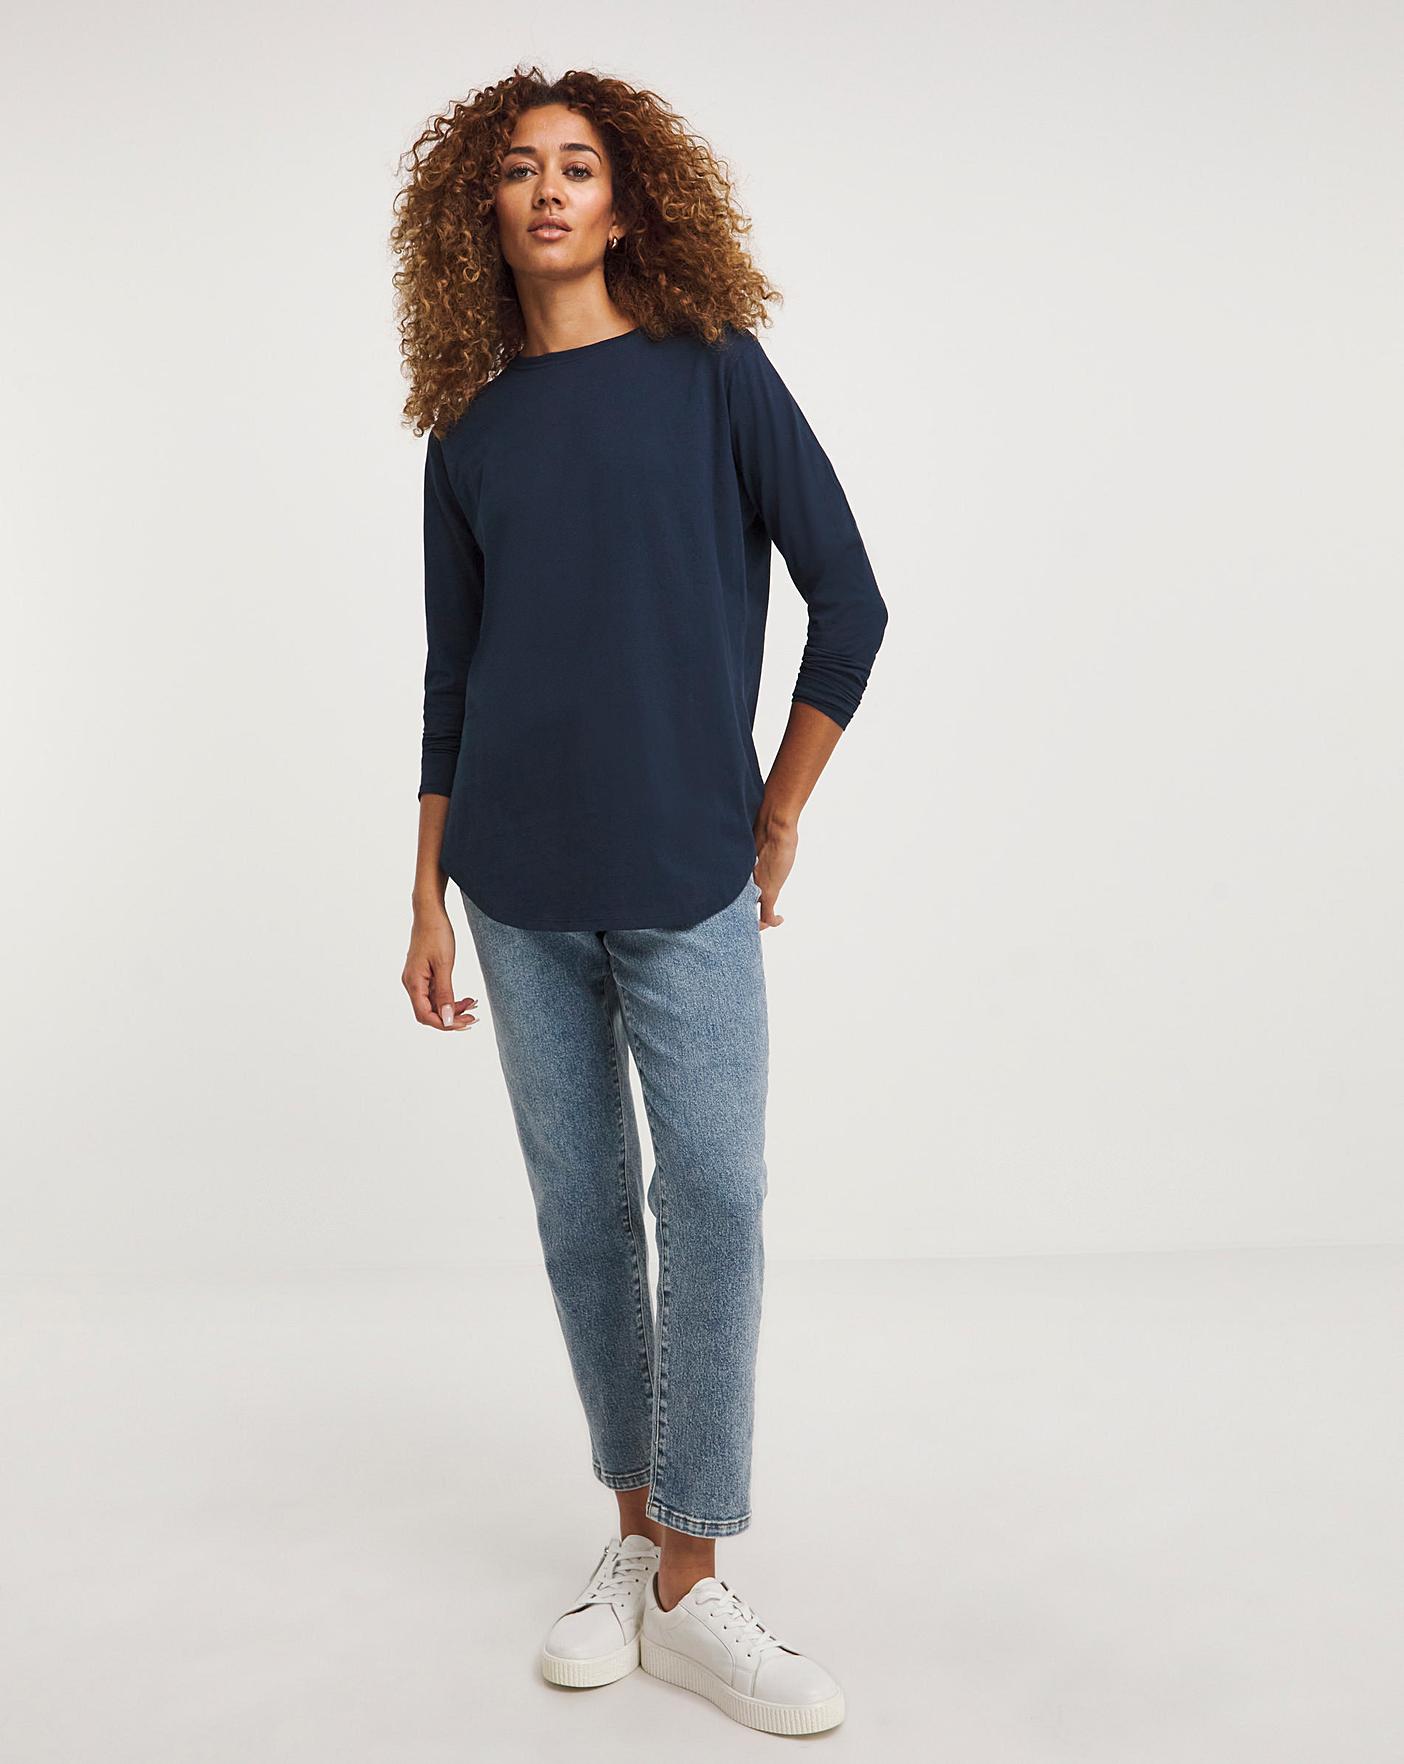 The Ribbed Longline Top